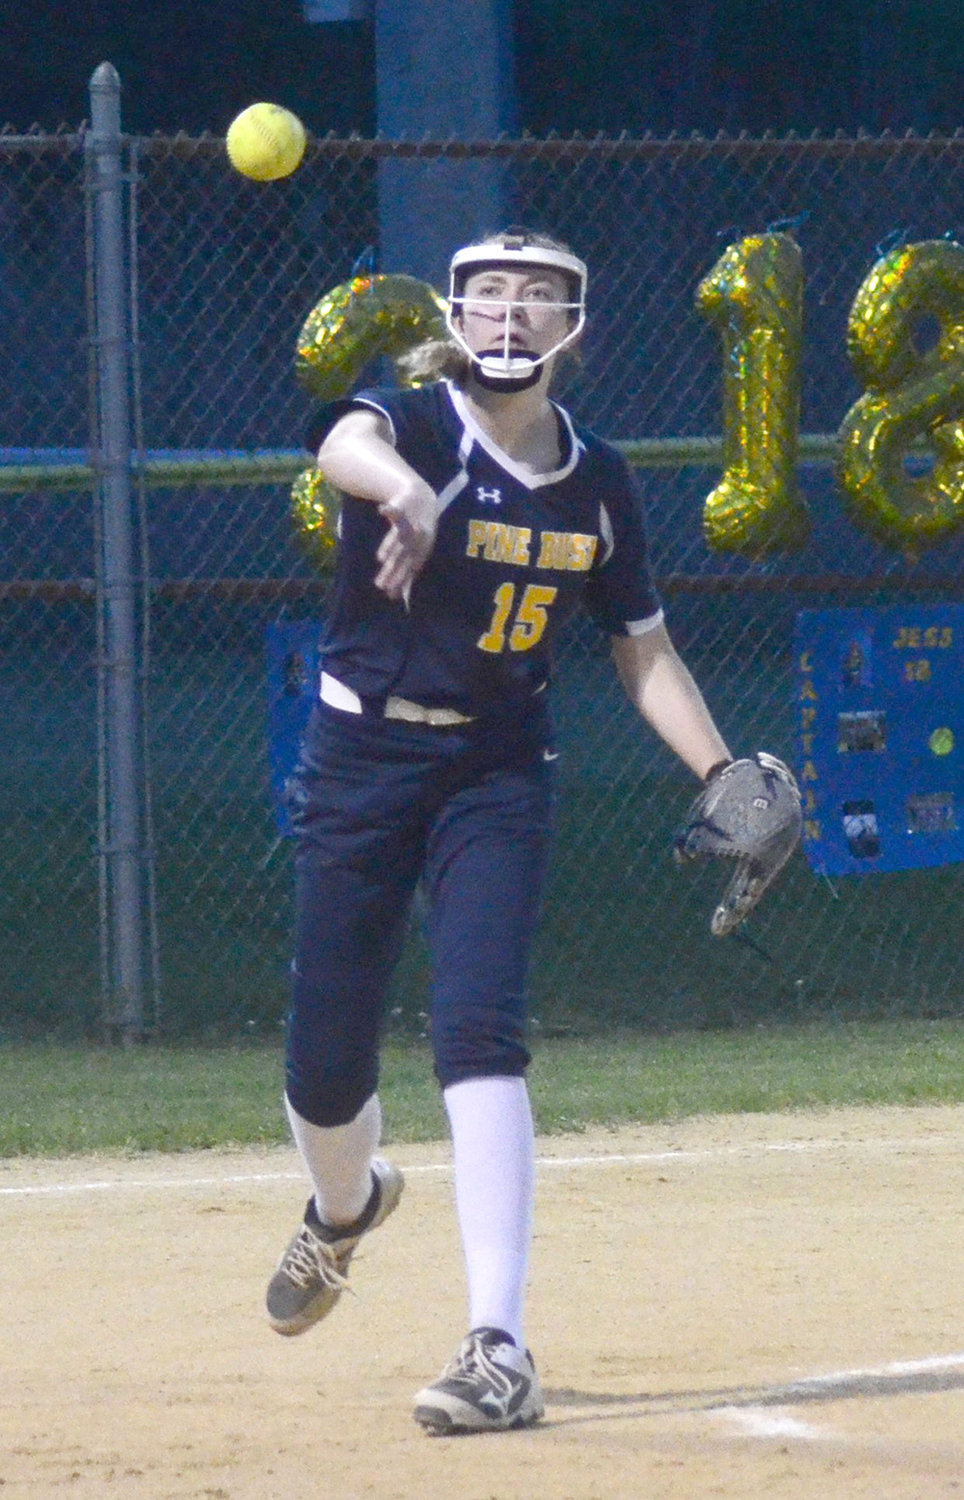 Pine Bush’s Ellie Hoppe makes a throw to first base during Wednesday’s OCIAA Division II game.